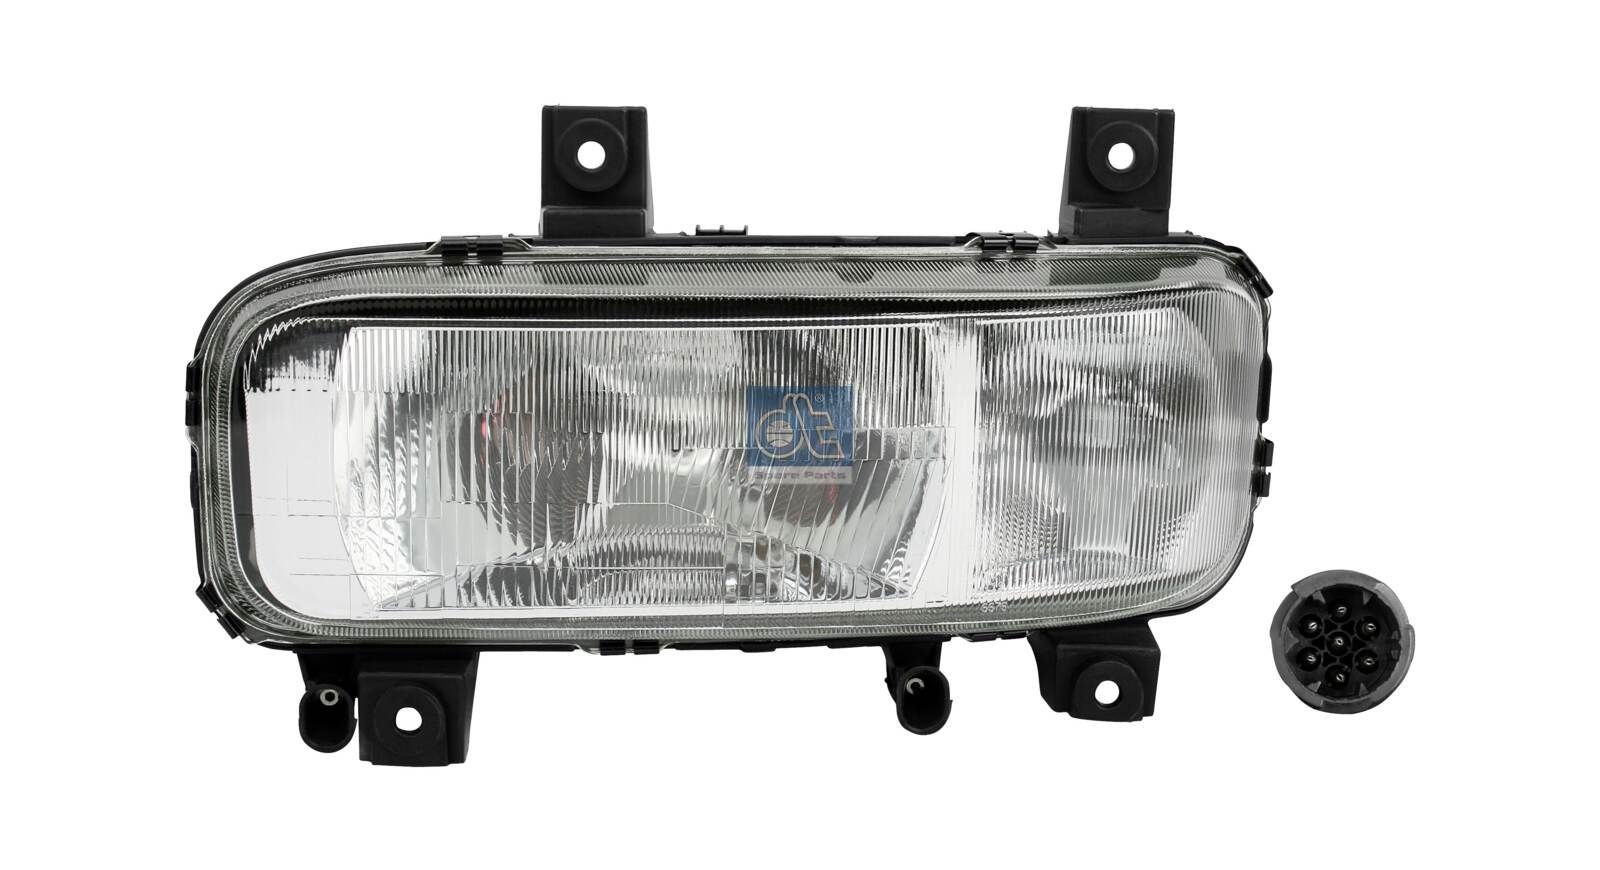 0 318 076 313 DT Spare Parts 4.62343 Headlight A 973 820 01 61